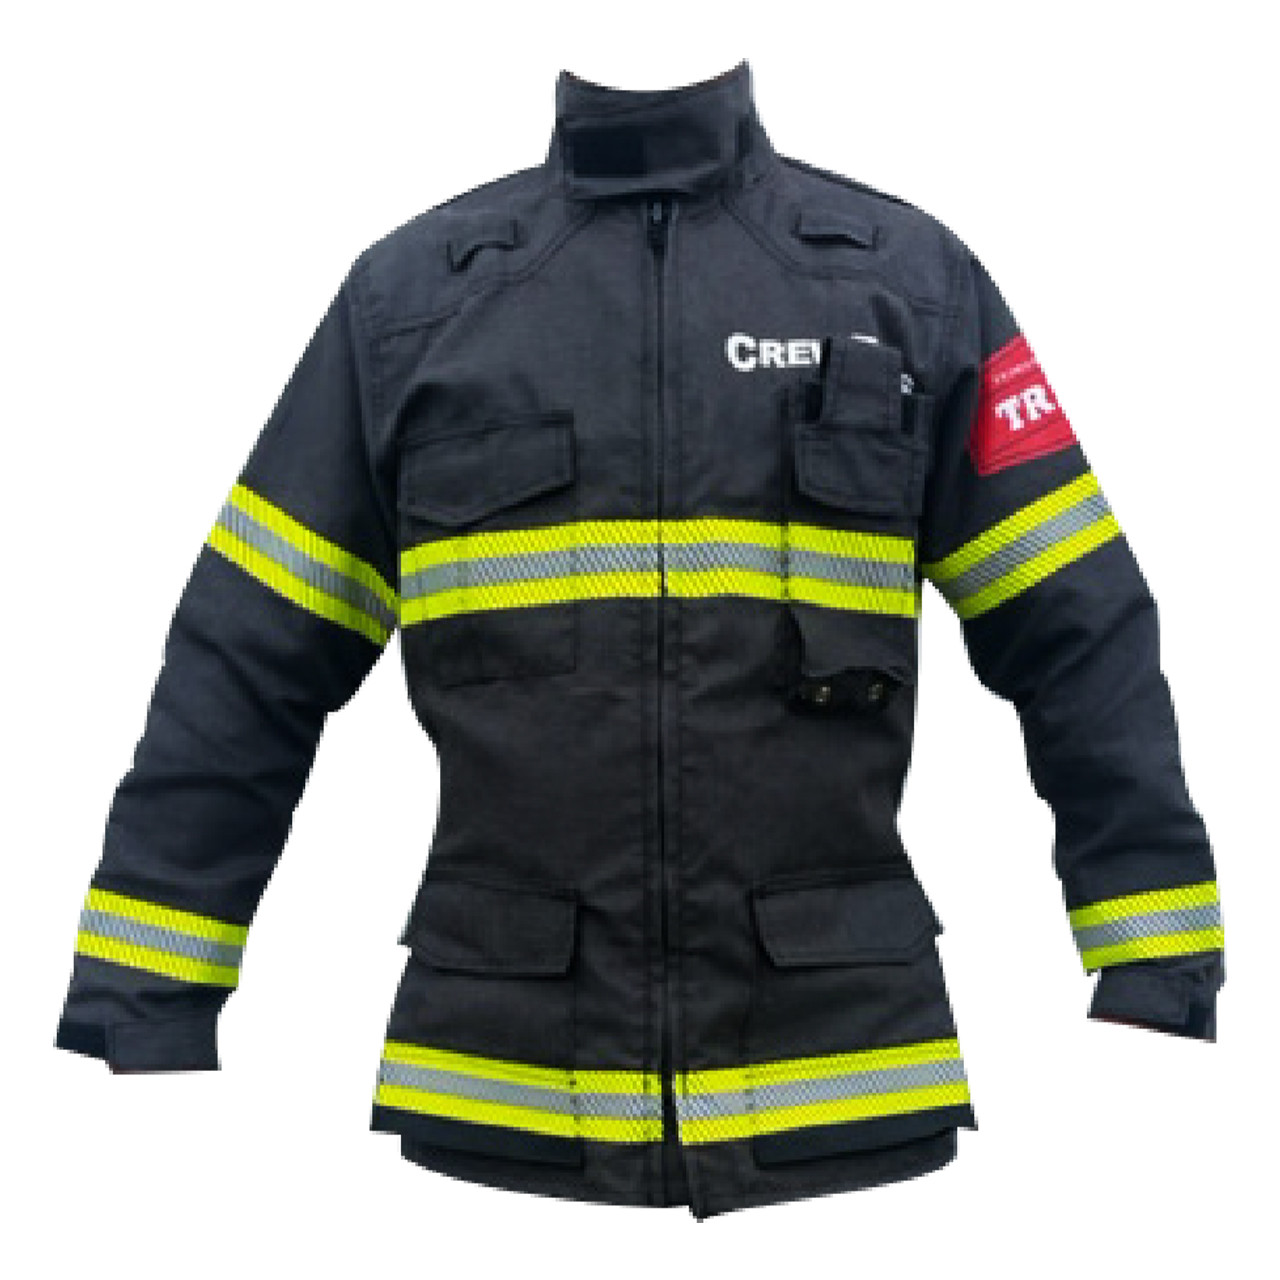 Cooling vest for firefighters - Specialty Fabrics Review